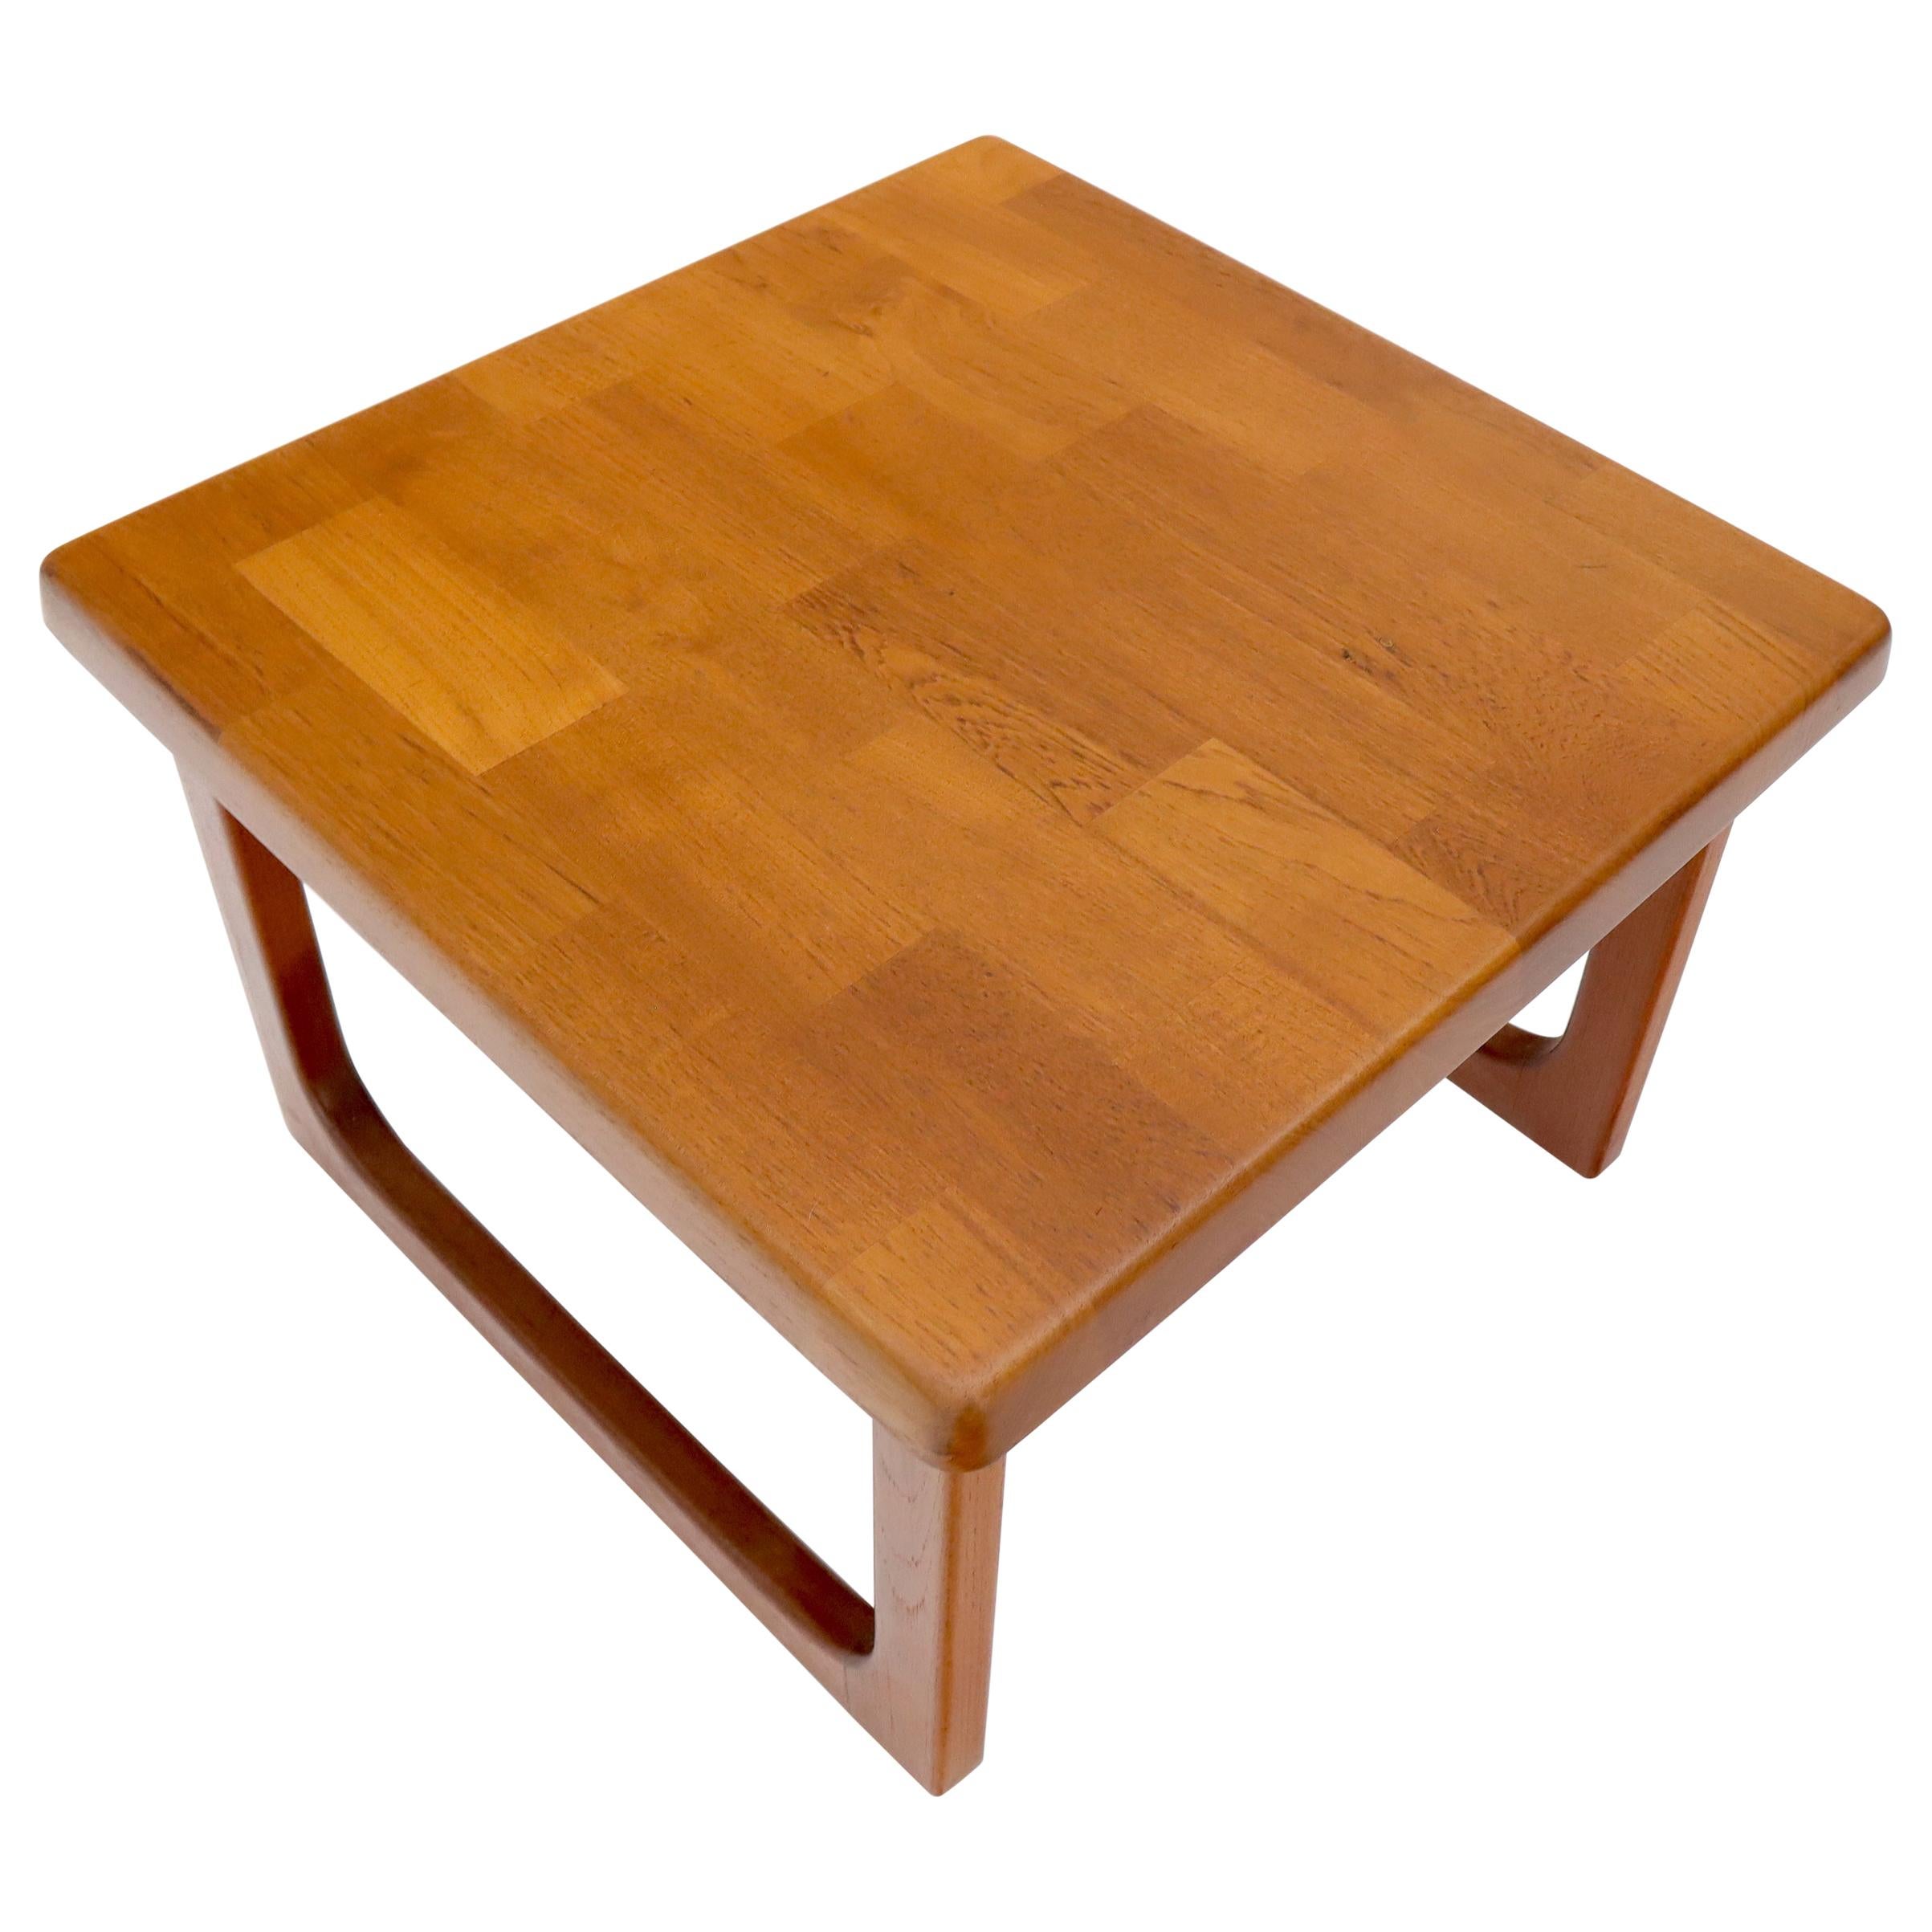 Danish Mid-Century Modern Solid Thick Teak Top Square Coffee Side Table For Sale